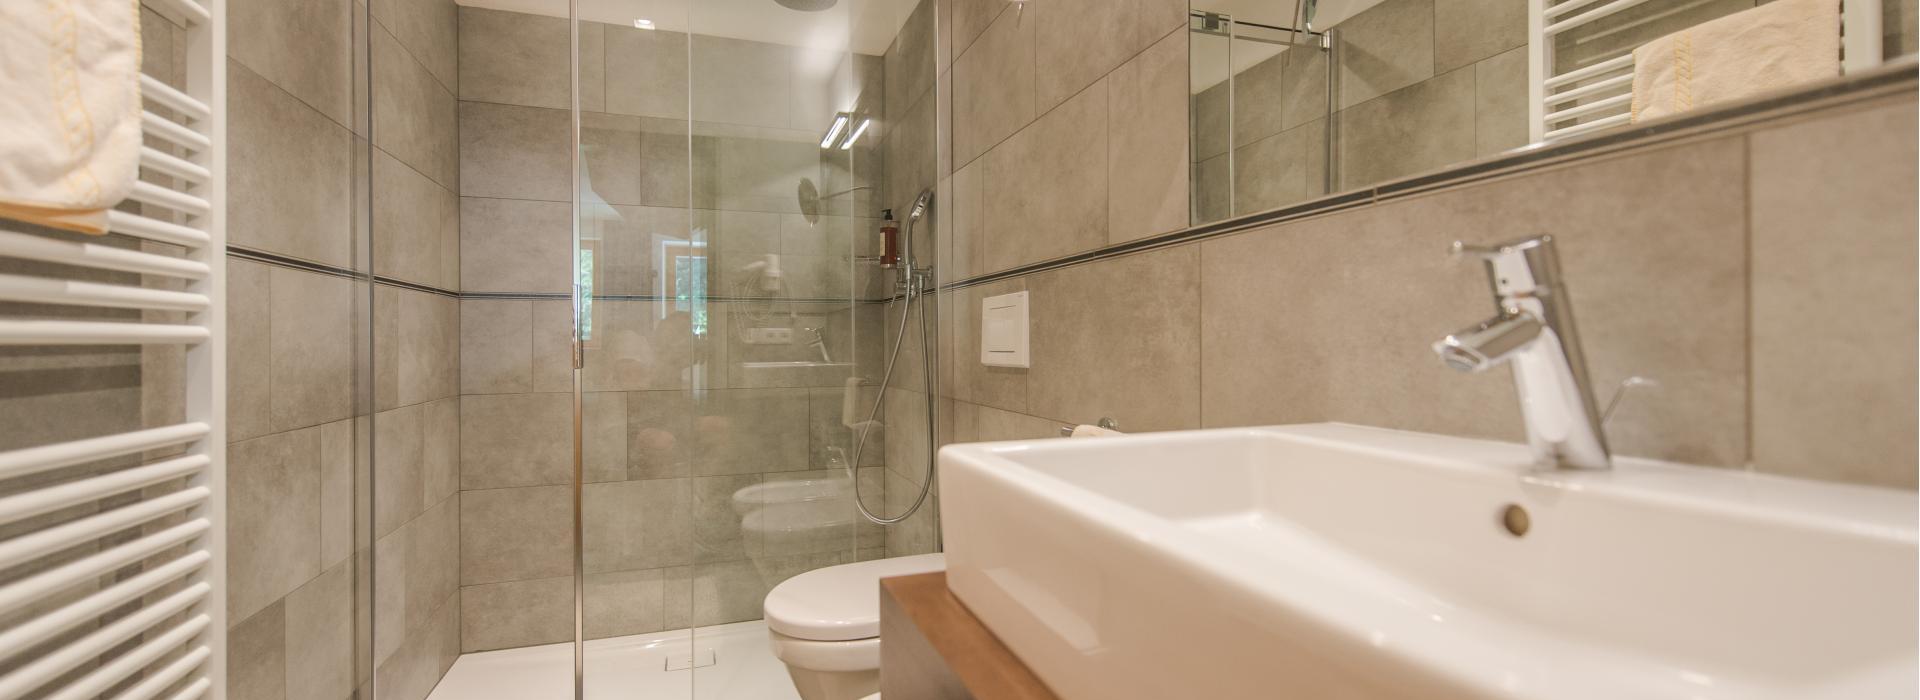 Bathroom of the single room Comfort with shower, washbasin, bidet and toilet